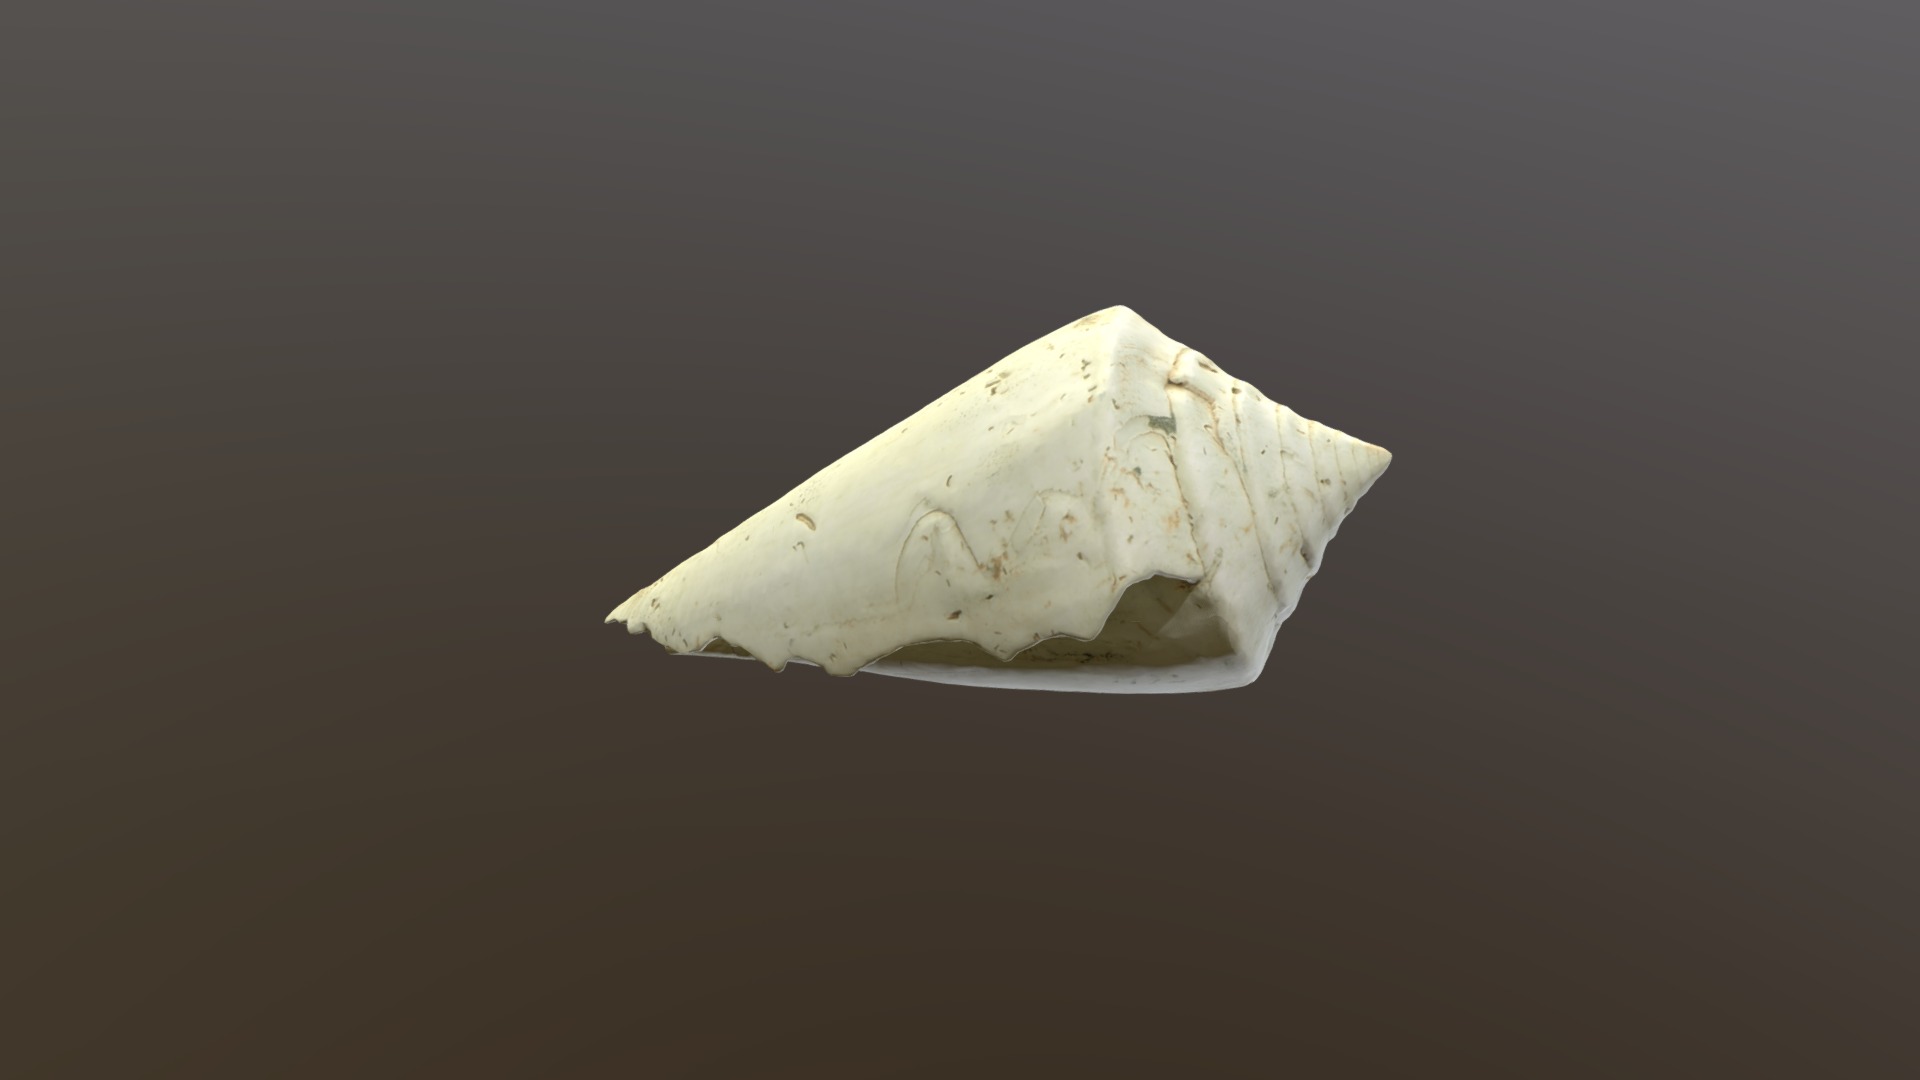 3D model Conus adversarius - This is a 3D model of the Conus adversarius. The 3D model is about a white piece of cheese.